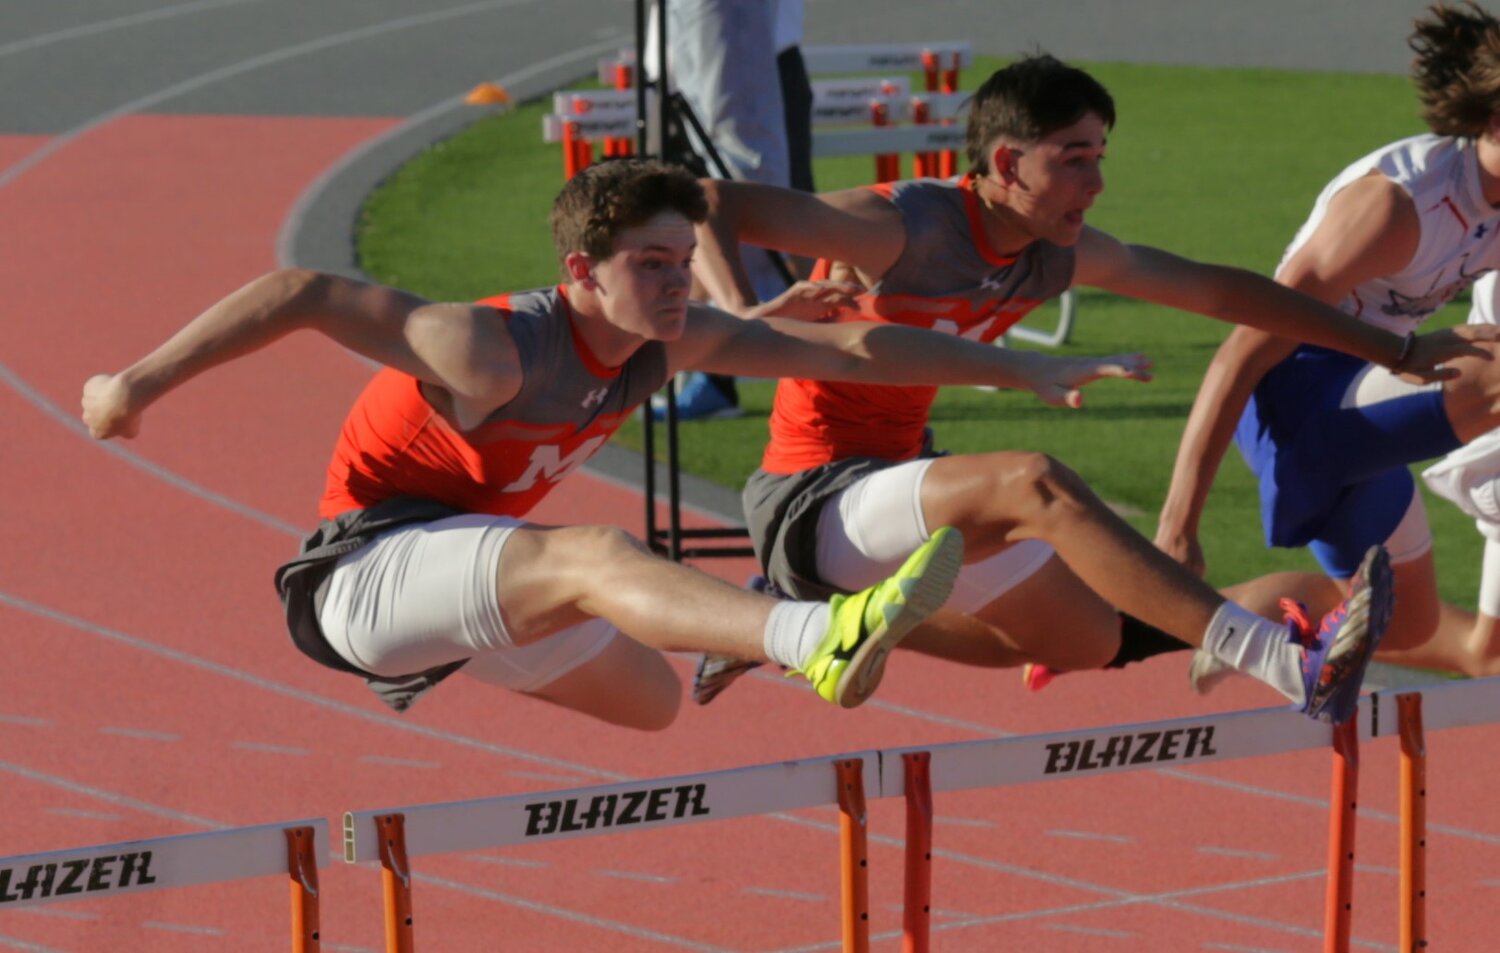 Mineola’s Chance Williams (left) and Caden Rupert are mirrored going over the second set of hurdles in the 110-meter high hurdles event. They finished second and third respectively. The event was won by Quitman’s Bryson Hobbs in 16.313. [see more speed and strength on display]